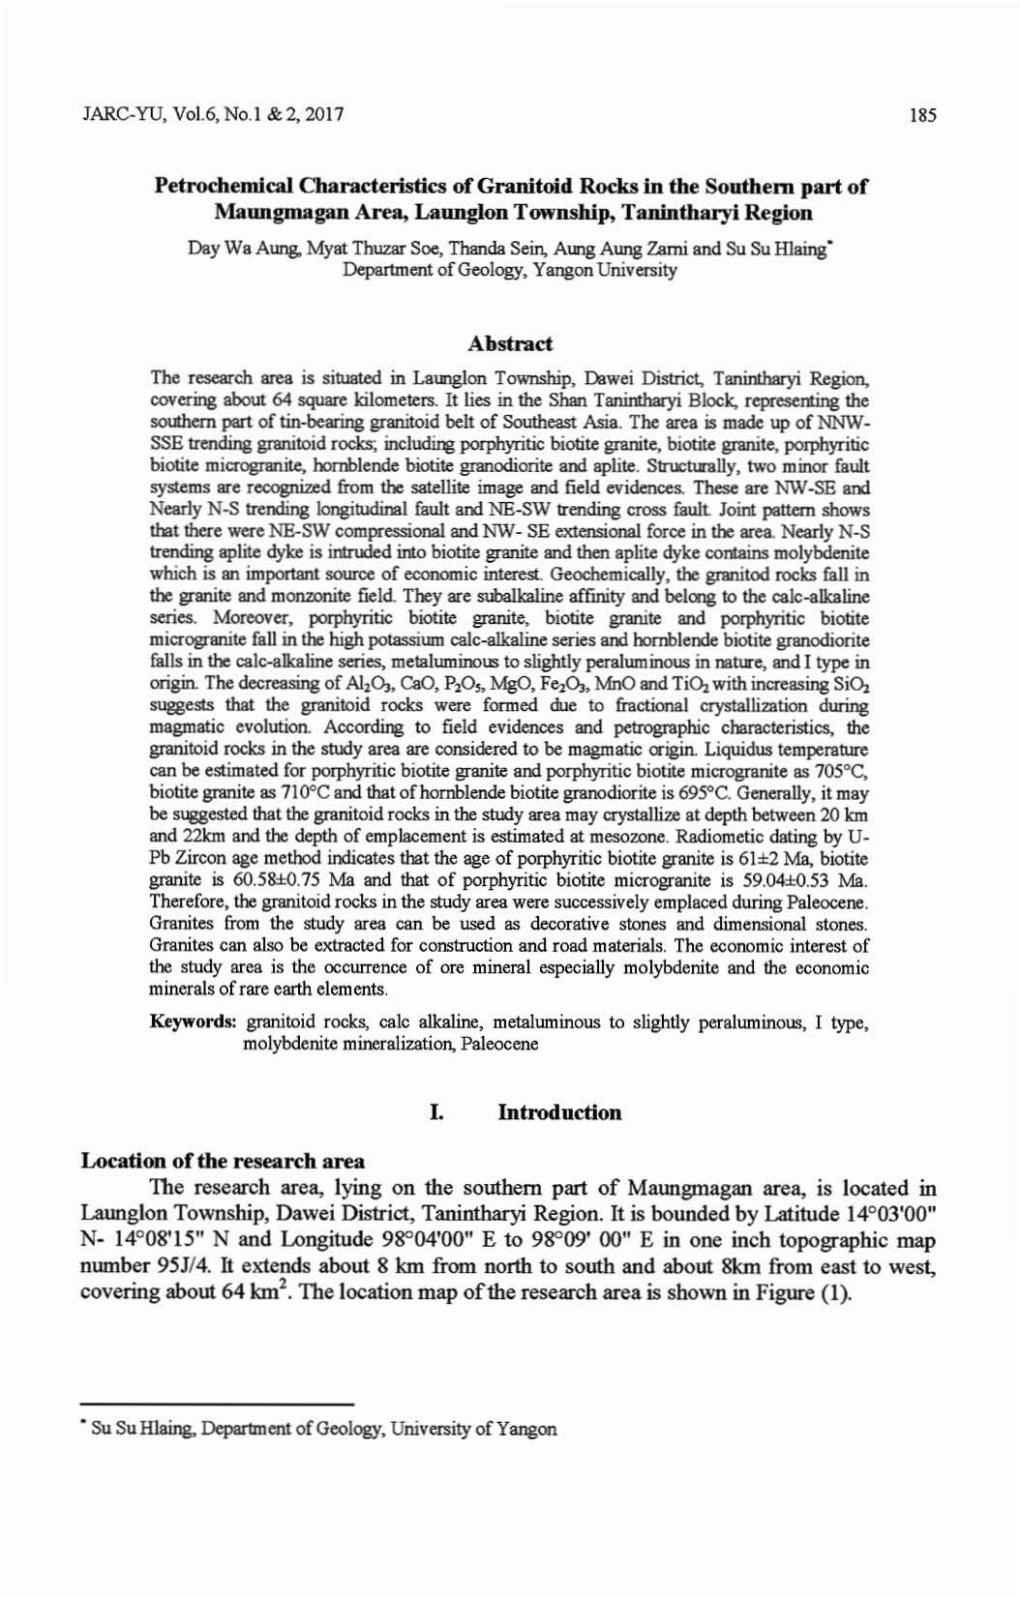 Petrochemical Characteristics of Granitoid Rocks in the Southern